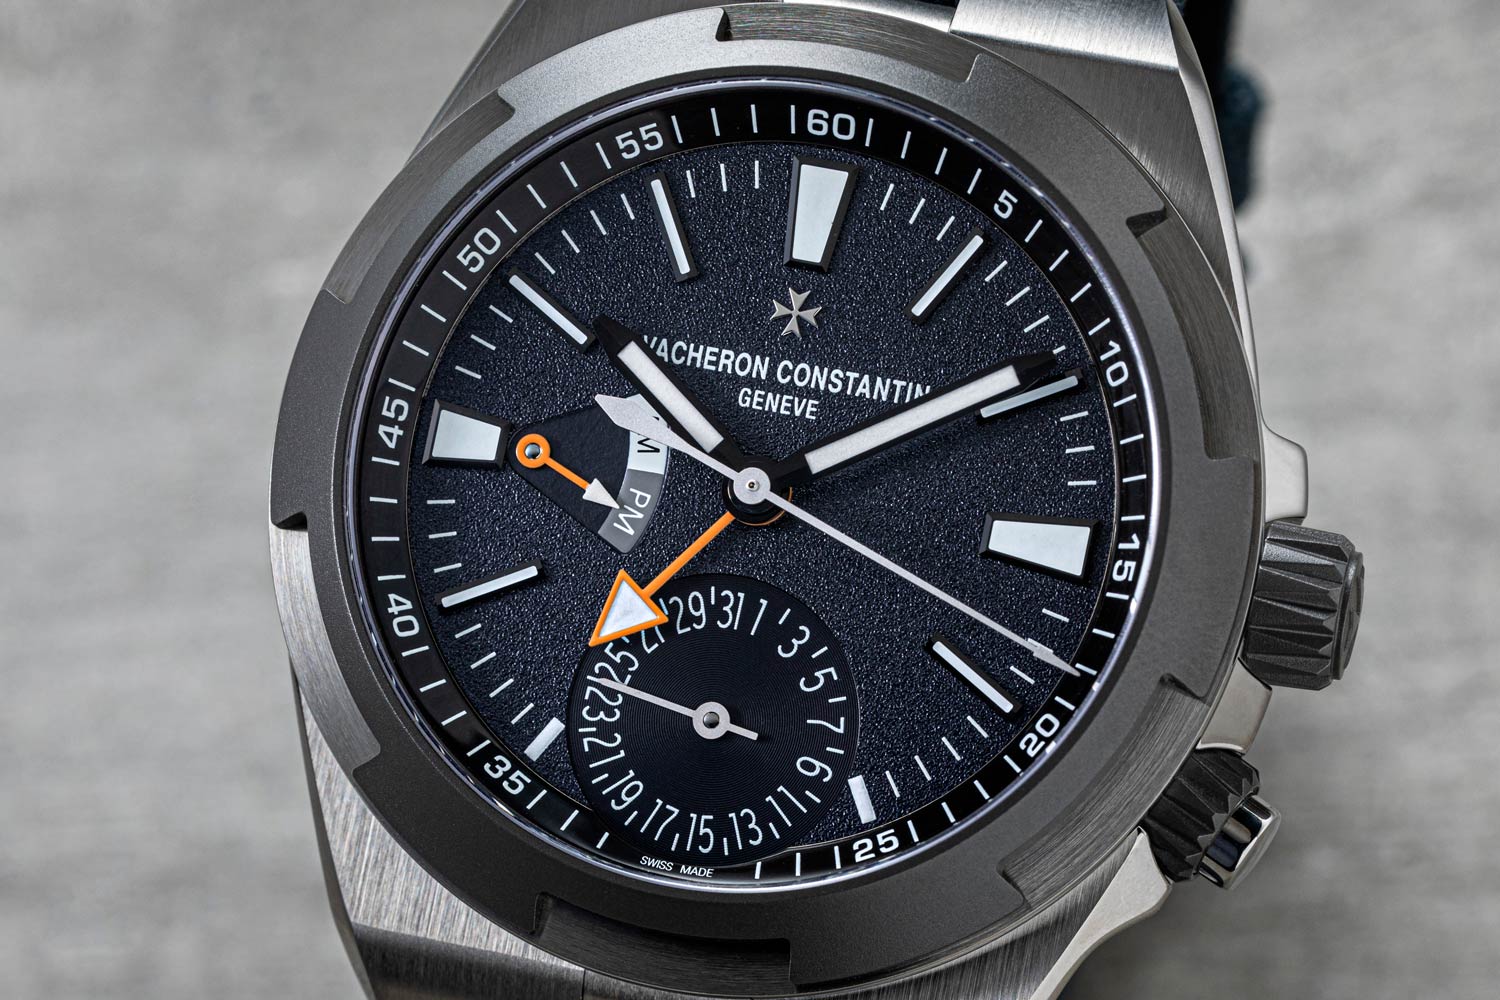 Limited to 150 pieces of each, the Everest Overseas models are titanium versions of the existing steel models with gorgeous grey-blue grained dials, orange accents, and Cordura fabric straps. (© Revolution)